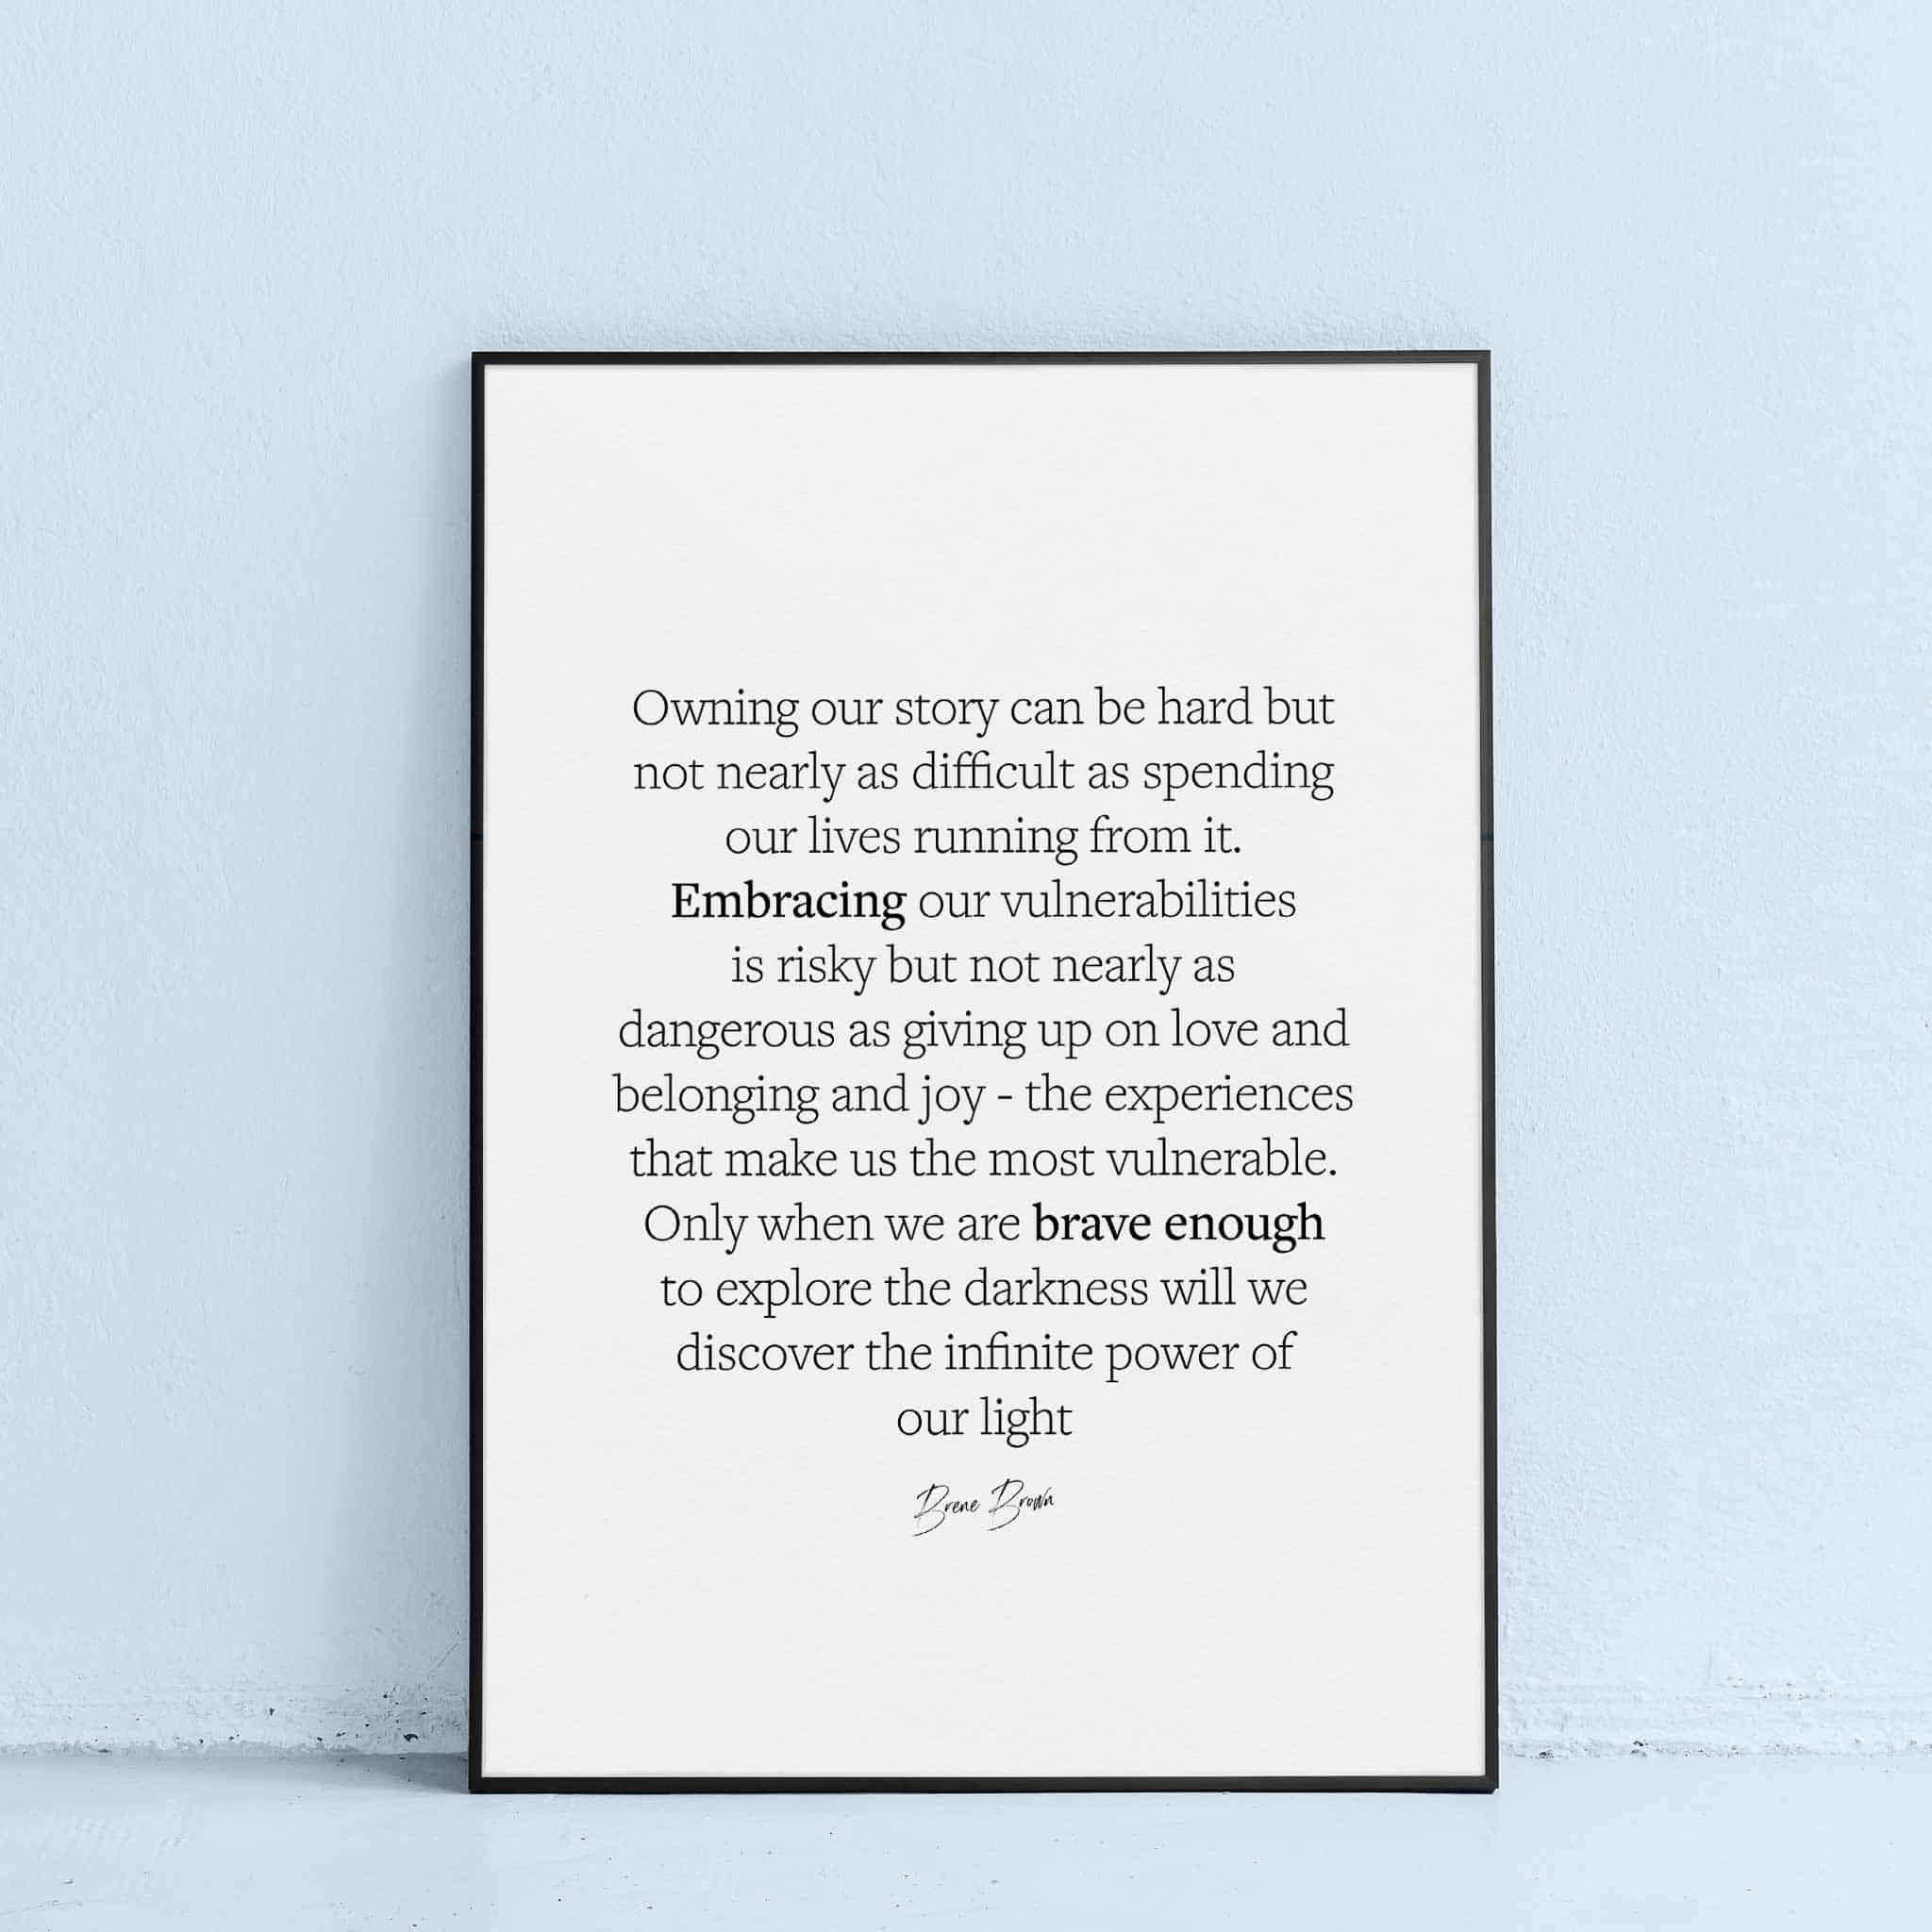 brene brown infinite power of our light quote printable wall art